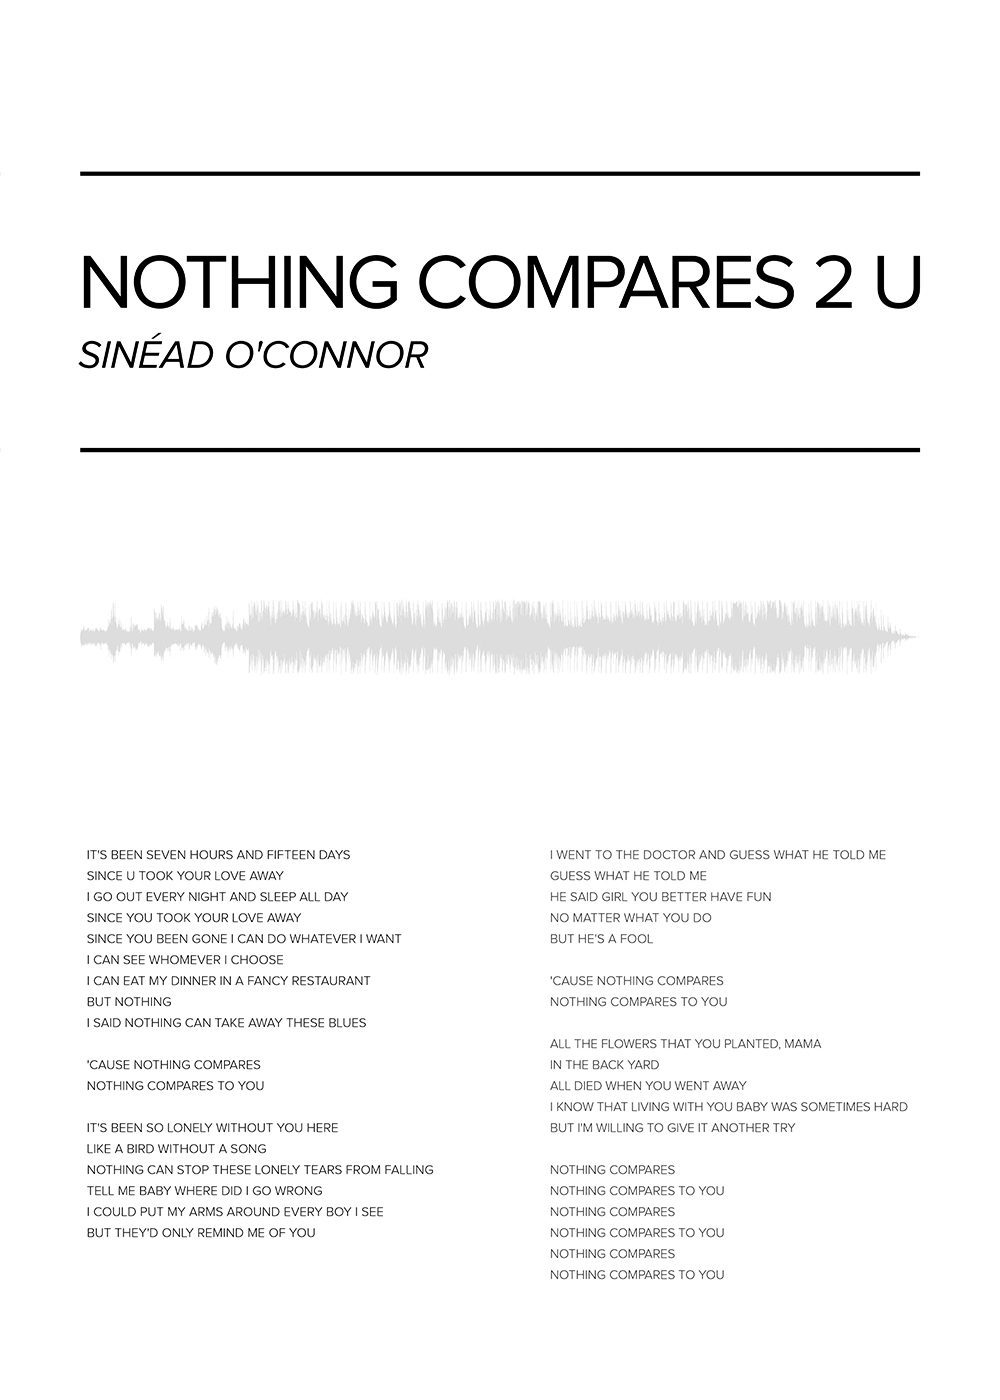 Sinéad O'Connor Nothing Compares 2 U Poster